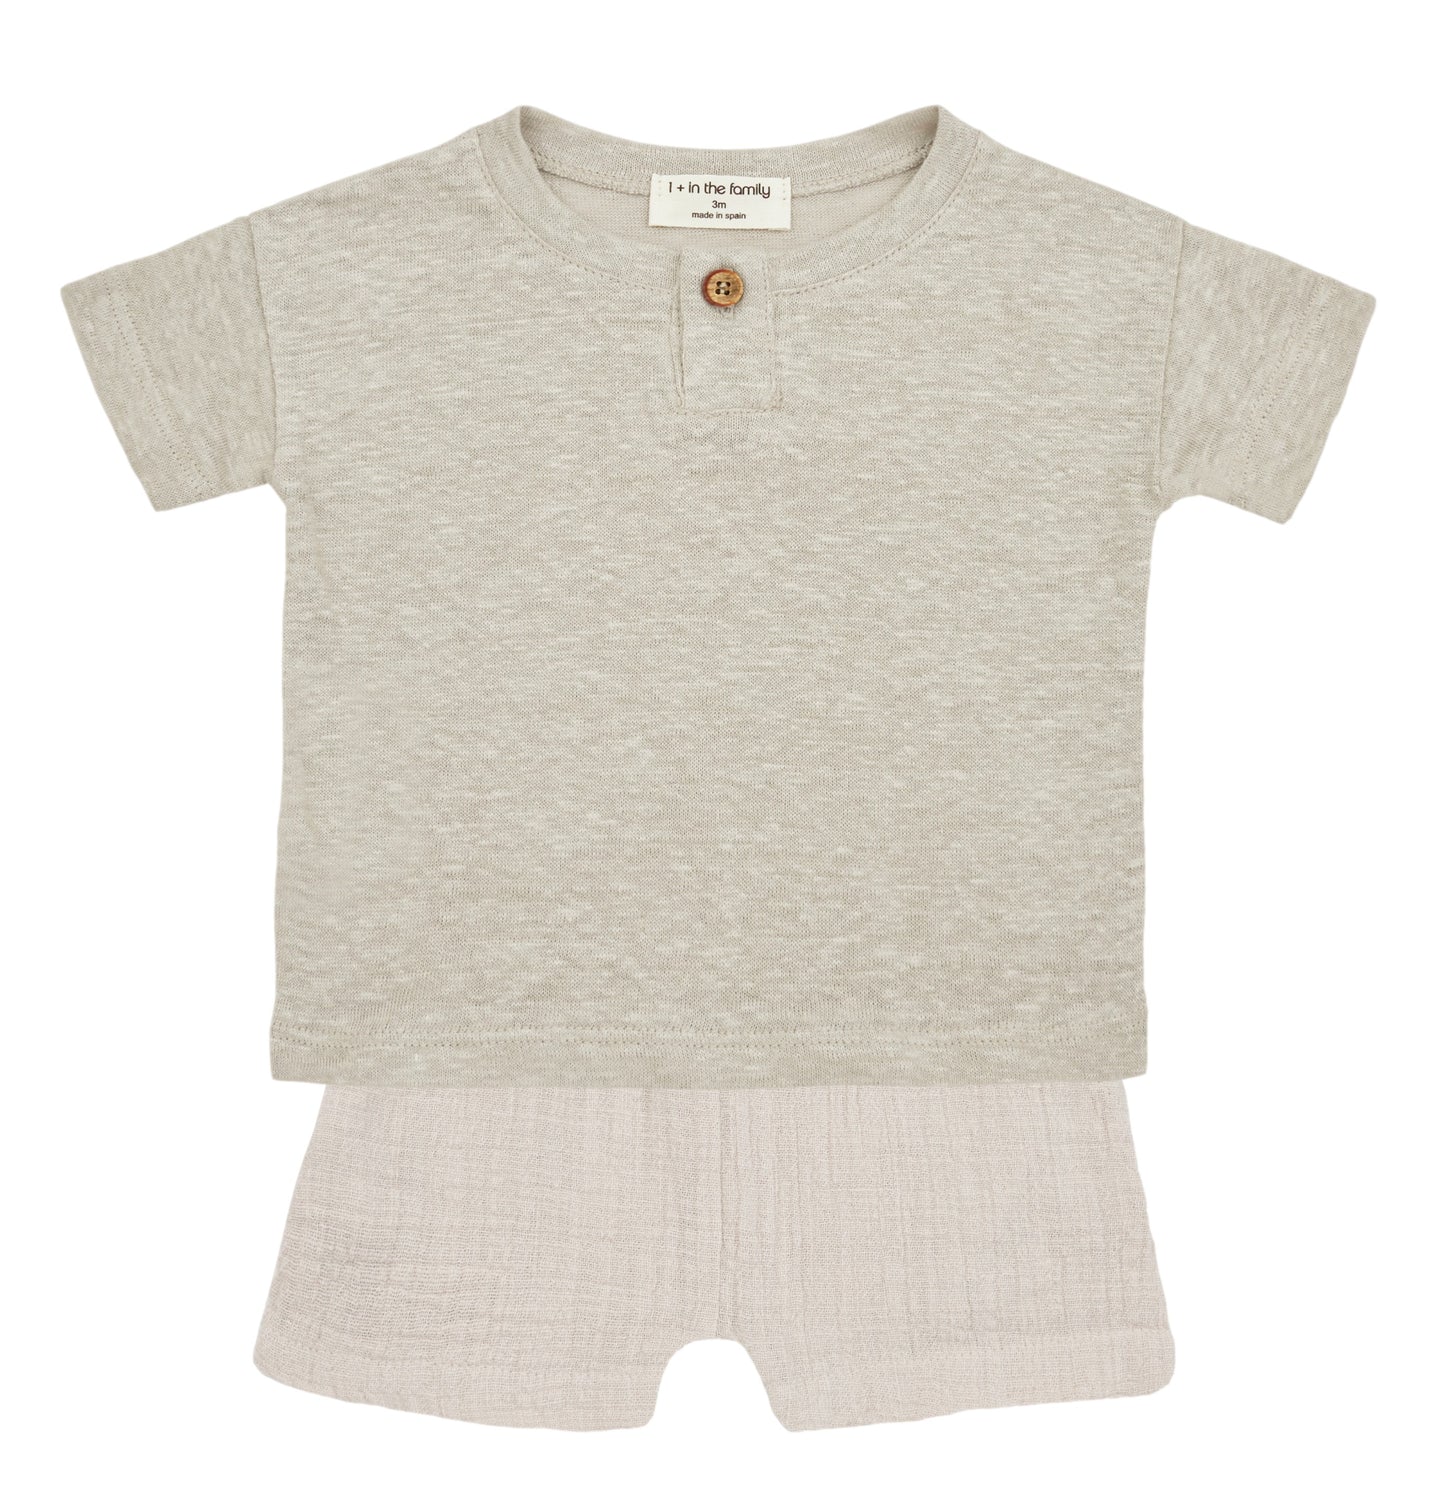 One + In the Family Carmen - Felix Outfit Set